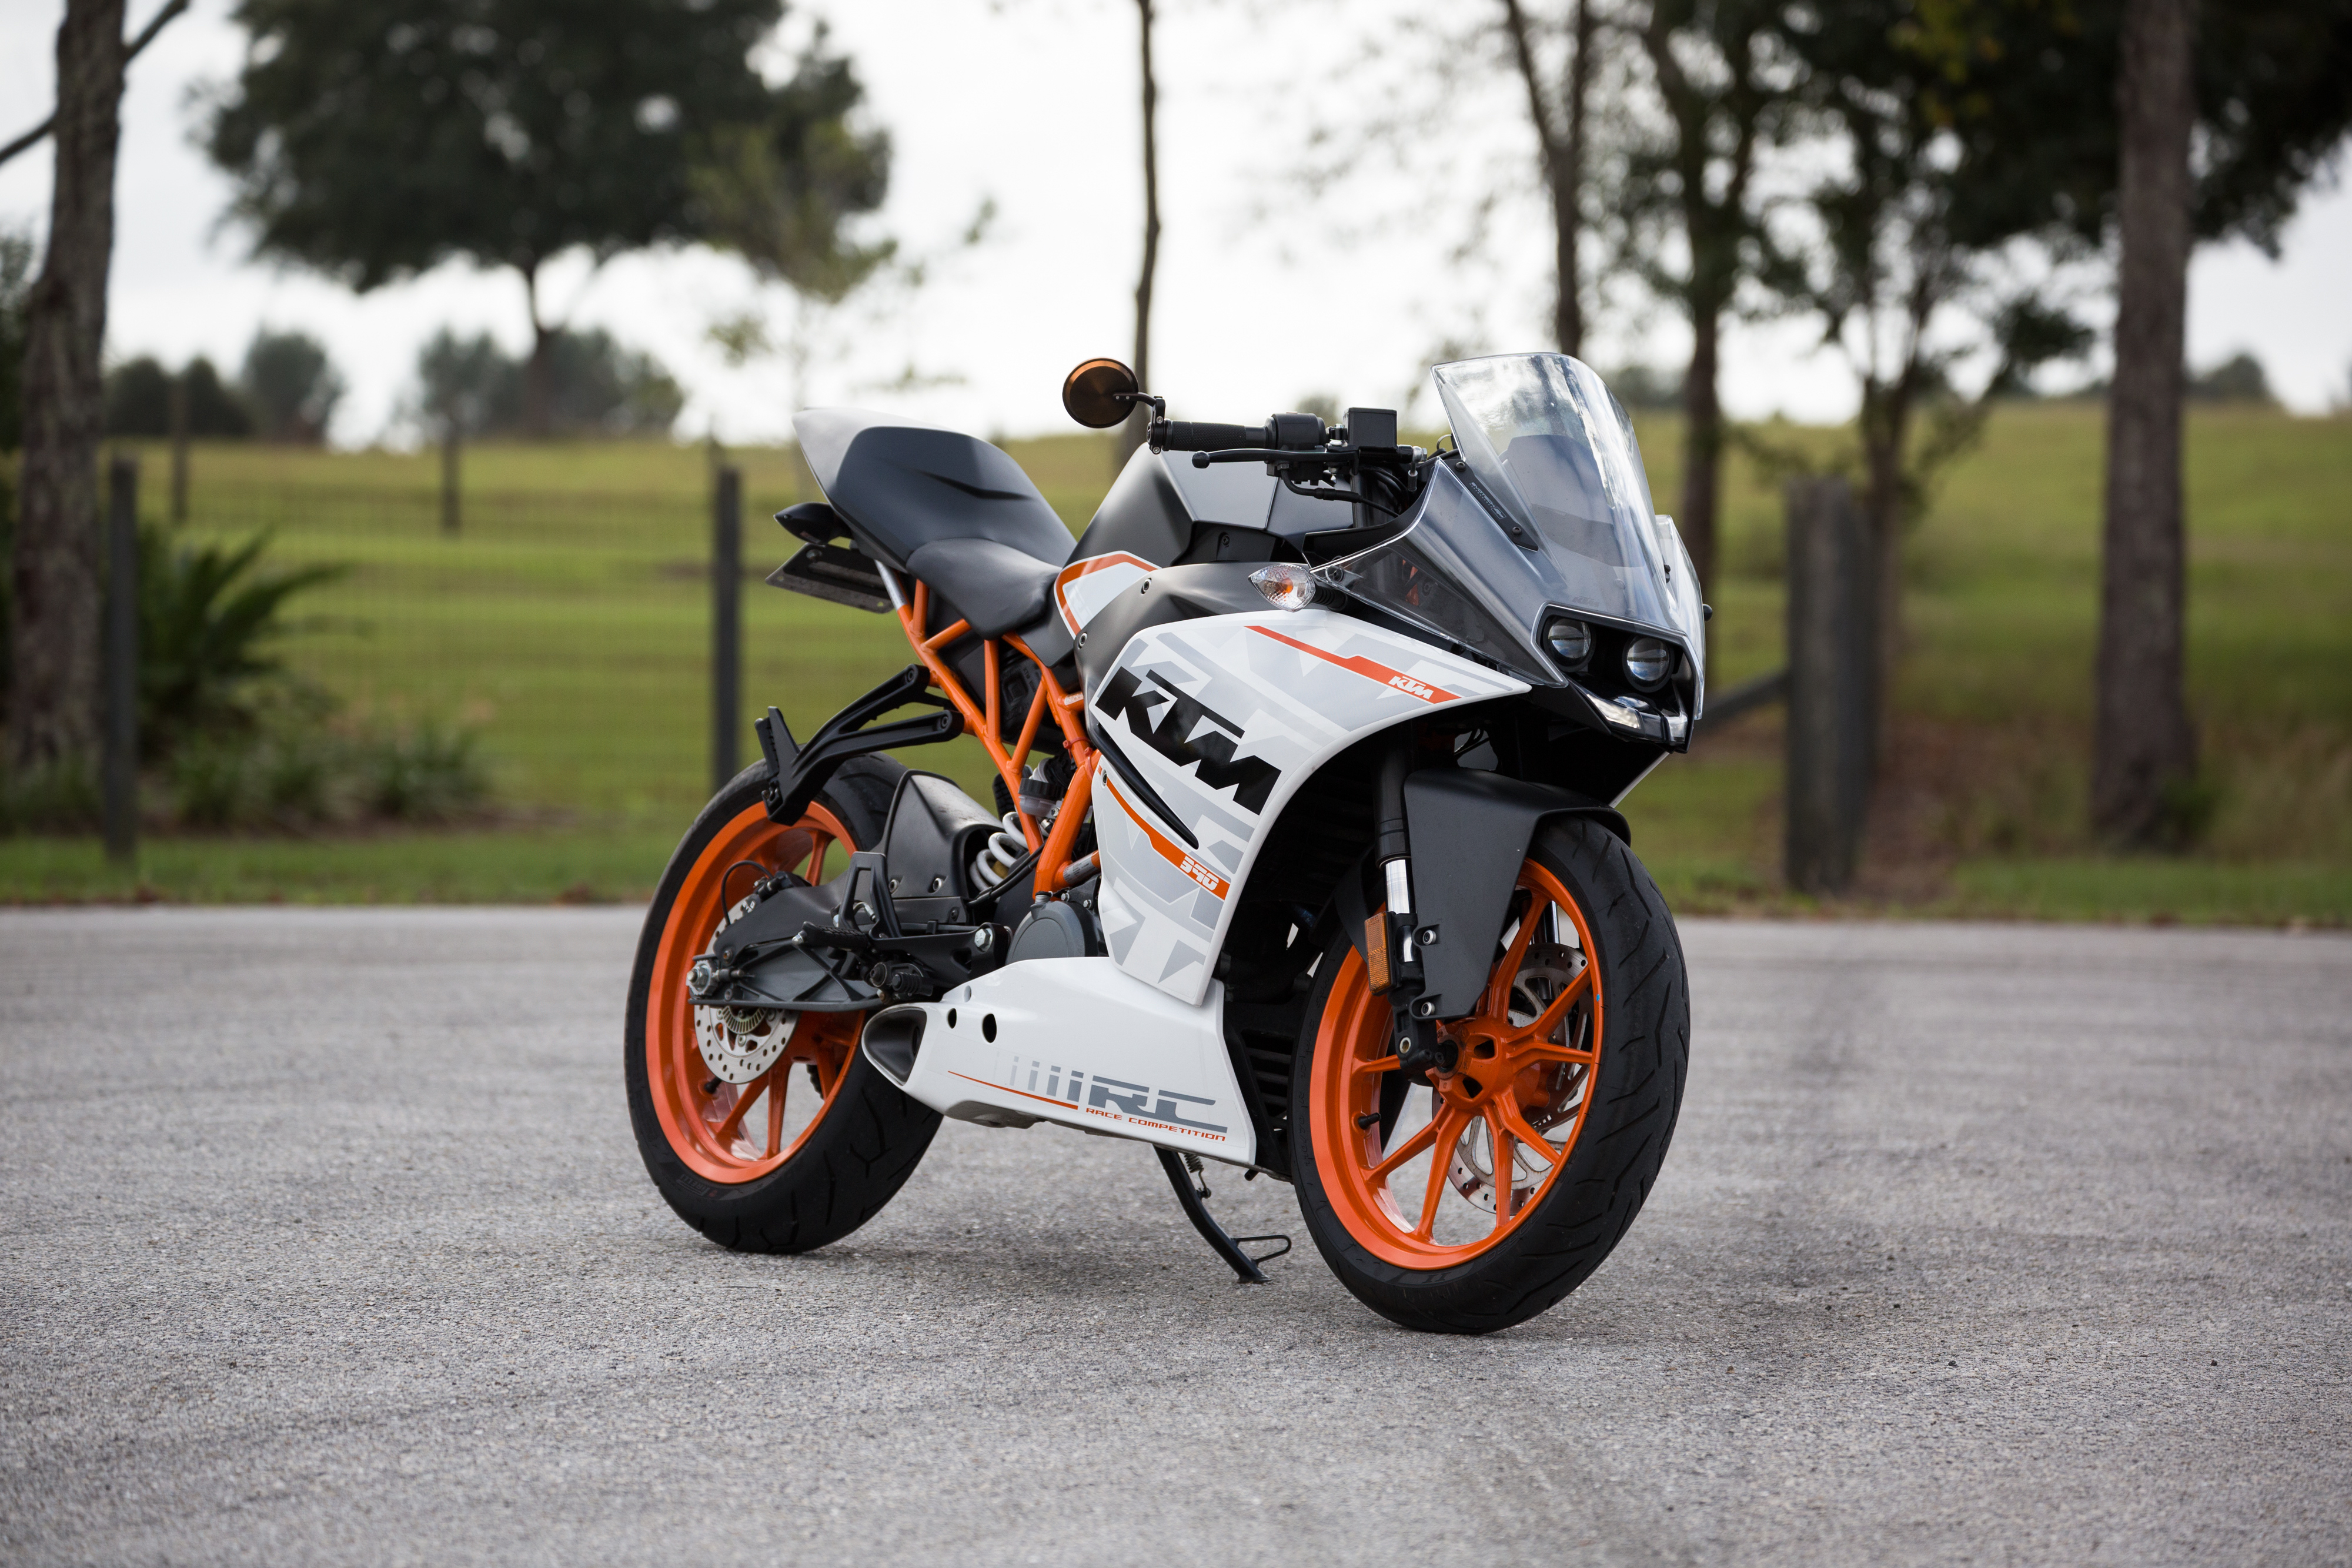 ktm, motorcycles, side view, motorcycle